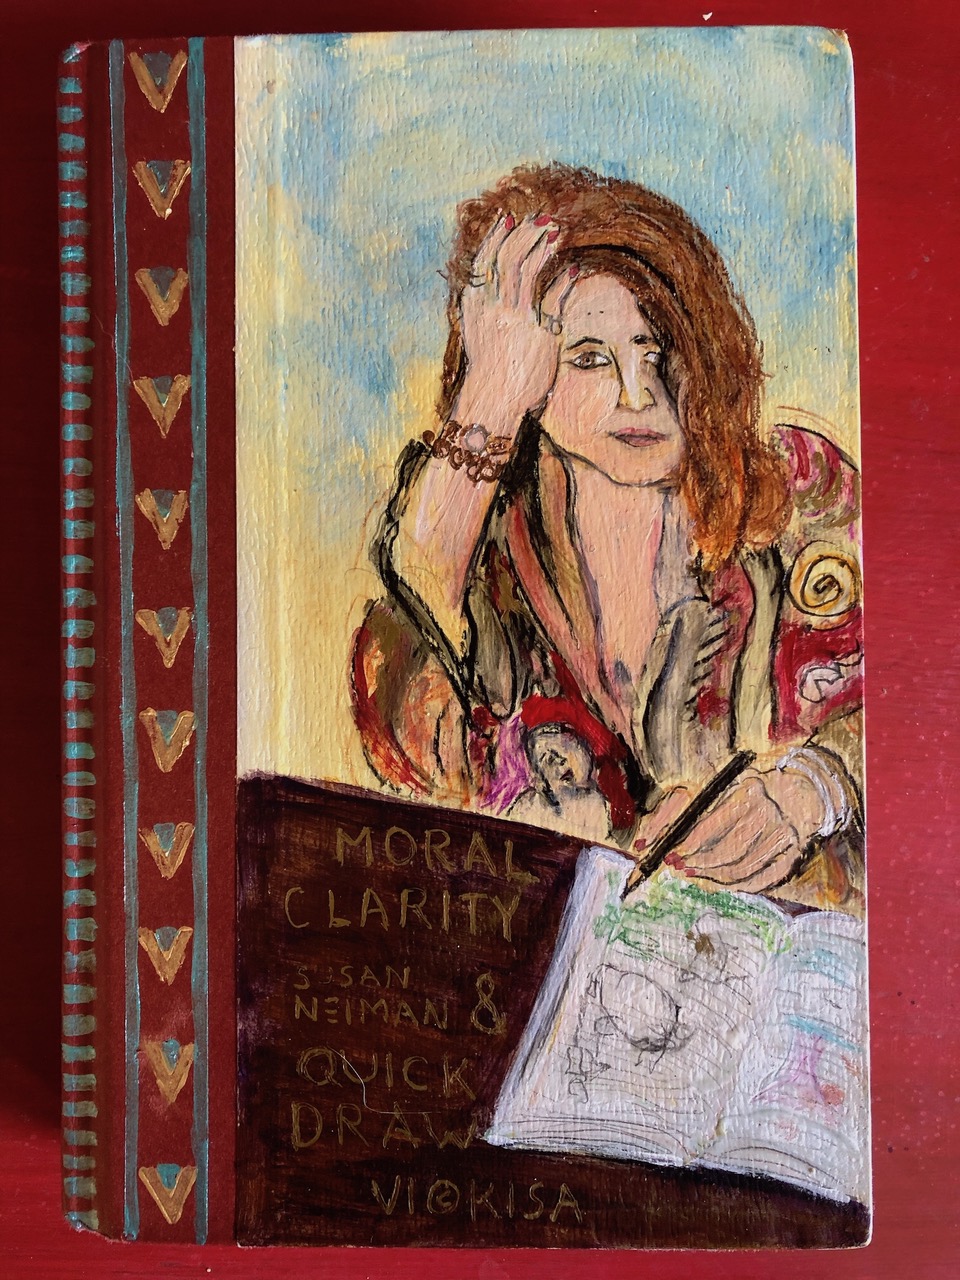 Vickisa - Moral Clarity Book Cover with Drawings